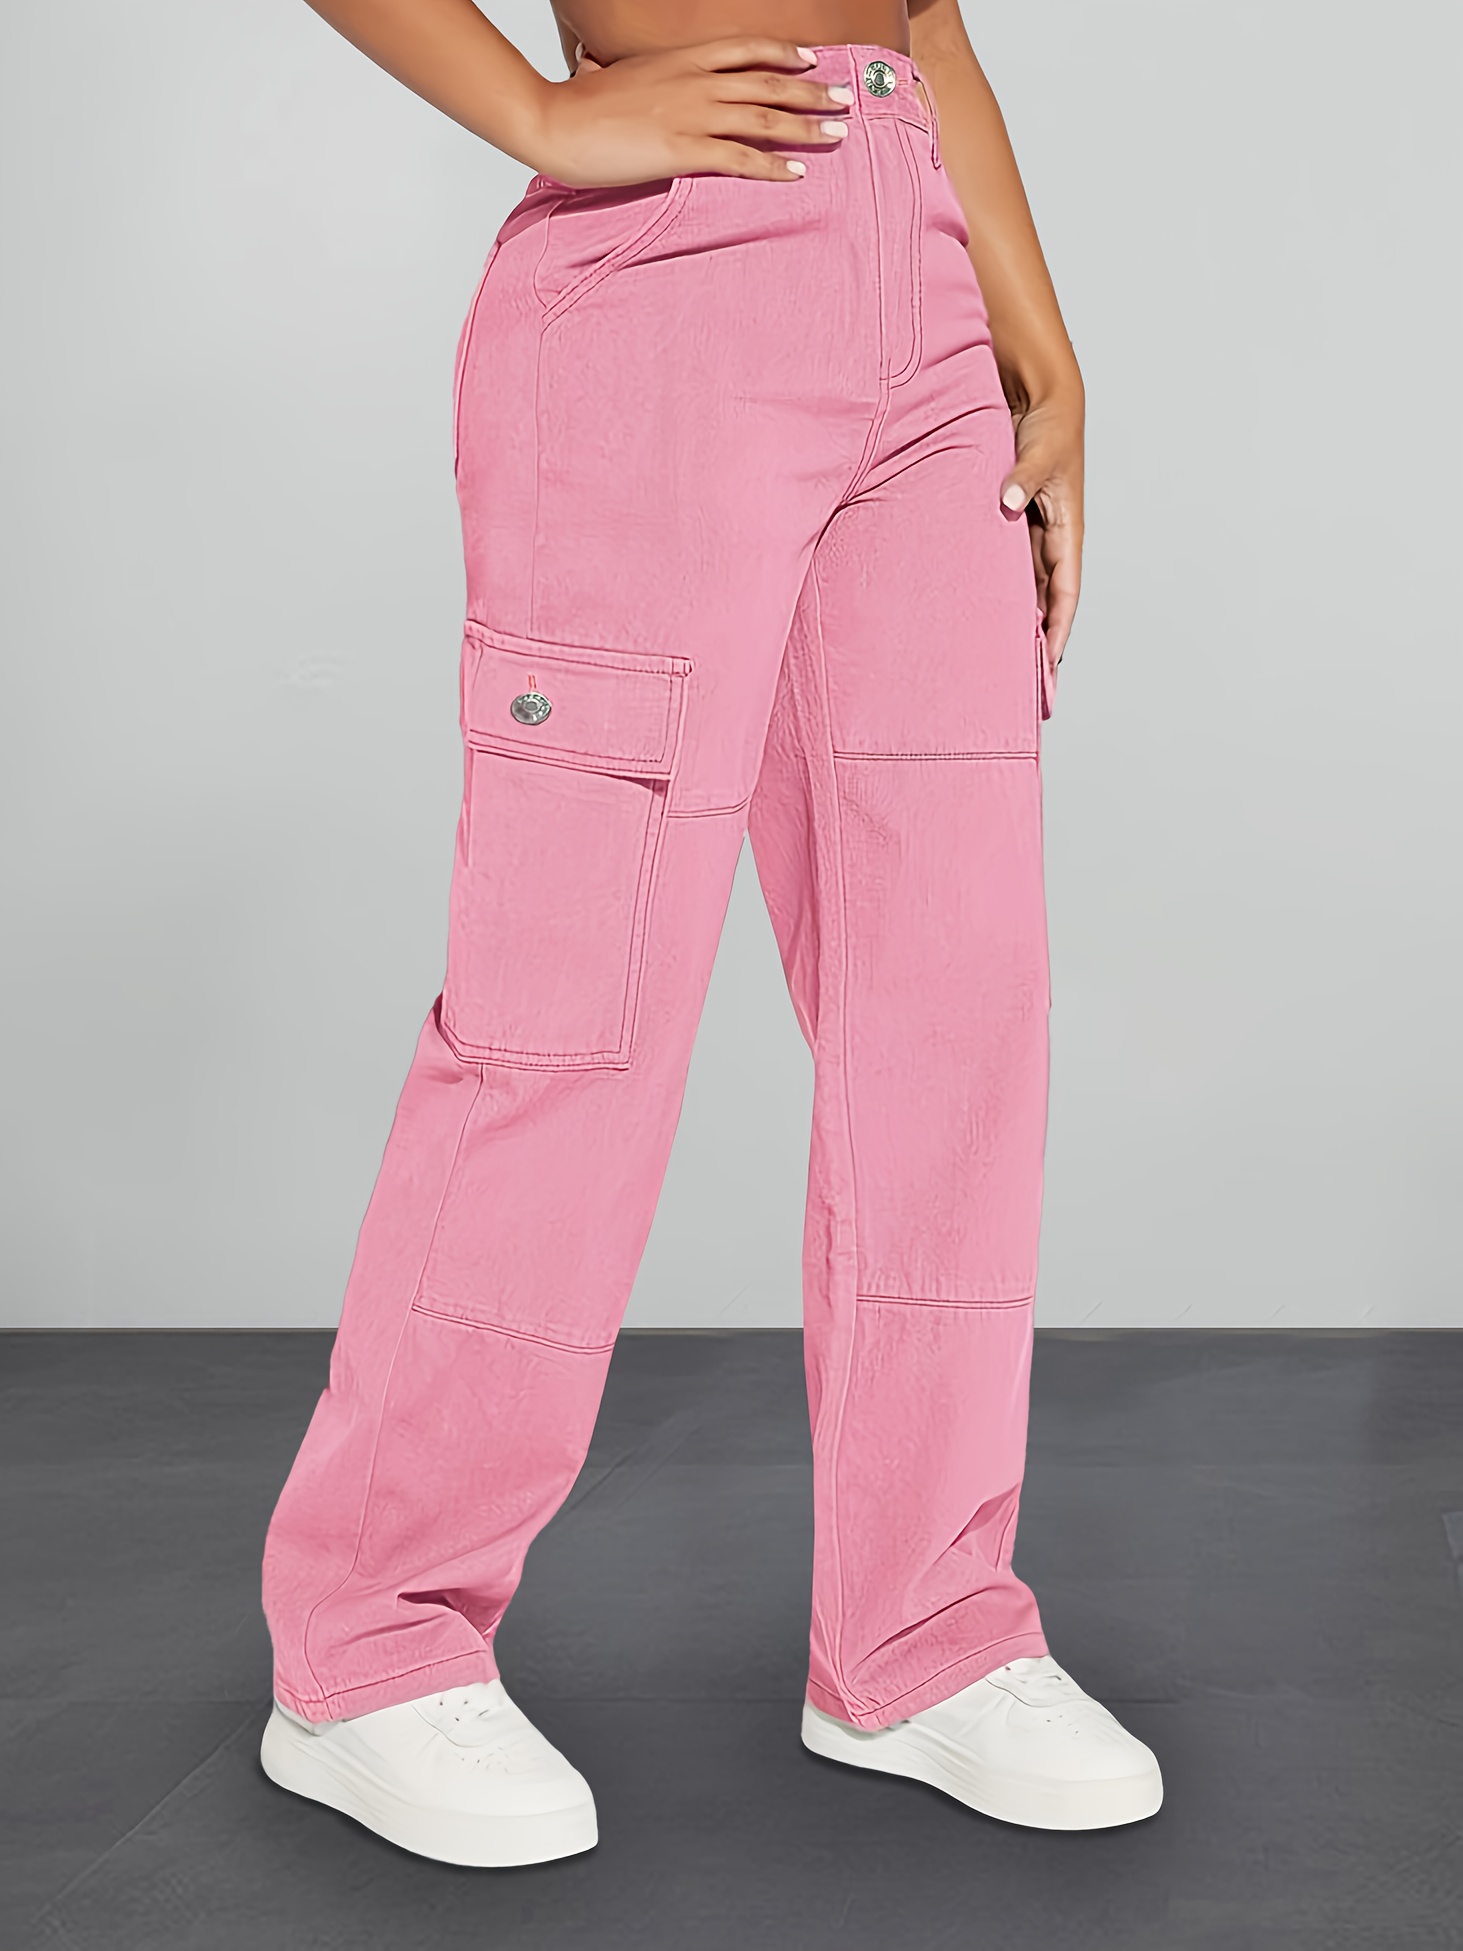 Pink Flap Pockets Cargo Pants, Ripped Holes Loose Fit Distressed Wide Legs  Jeans, Y2K & Kpop Women's Denim Jeans & Clothing